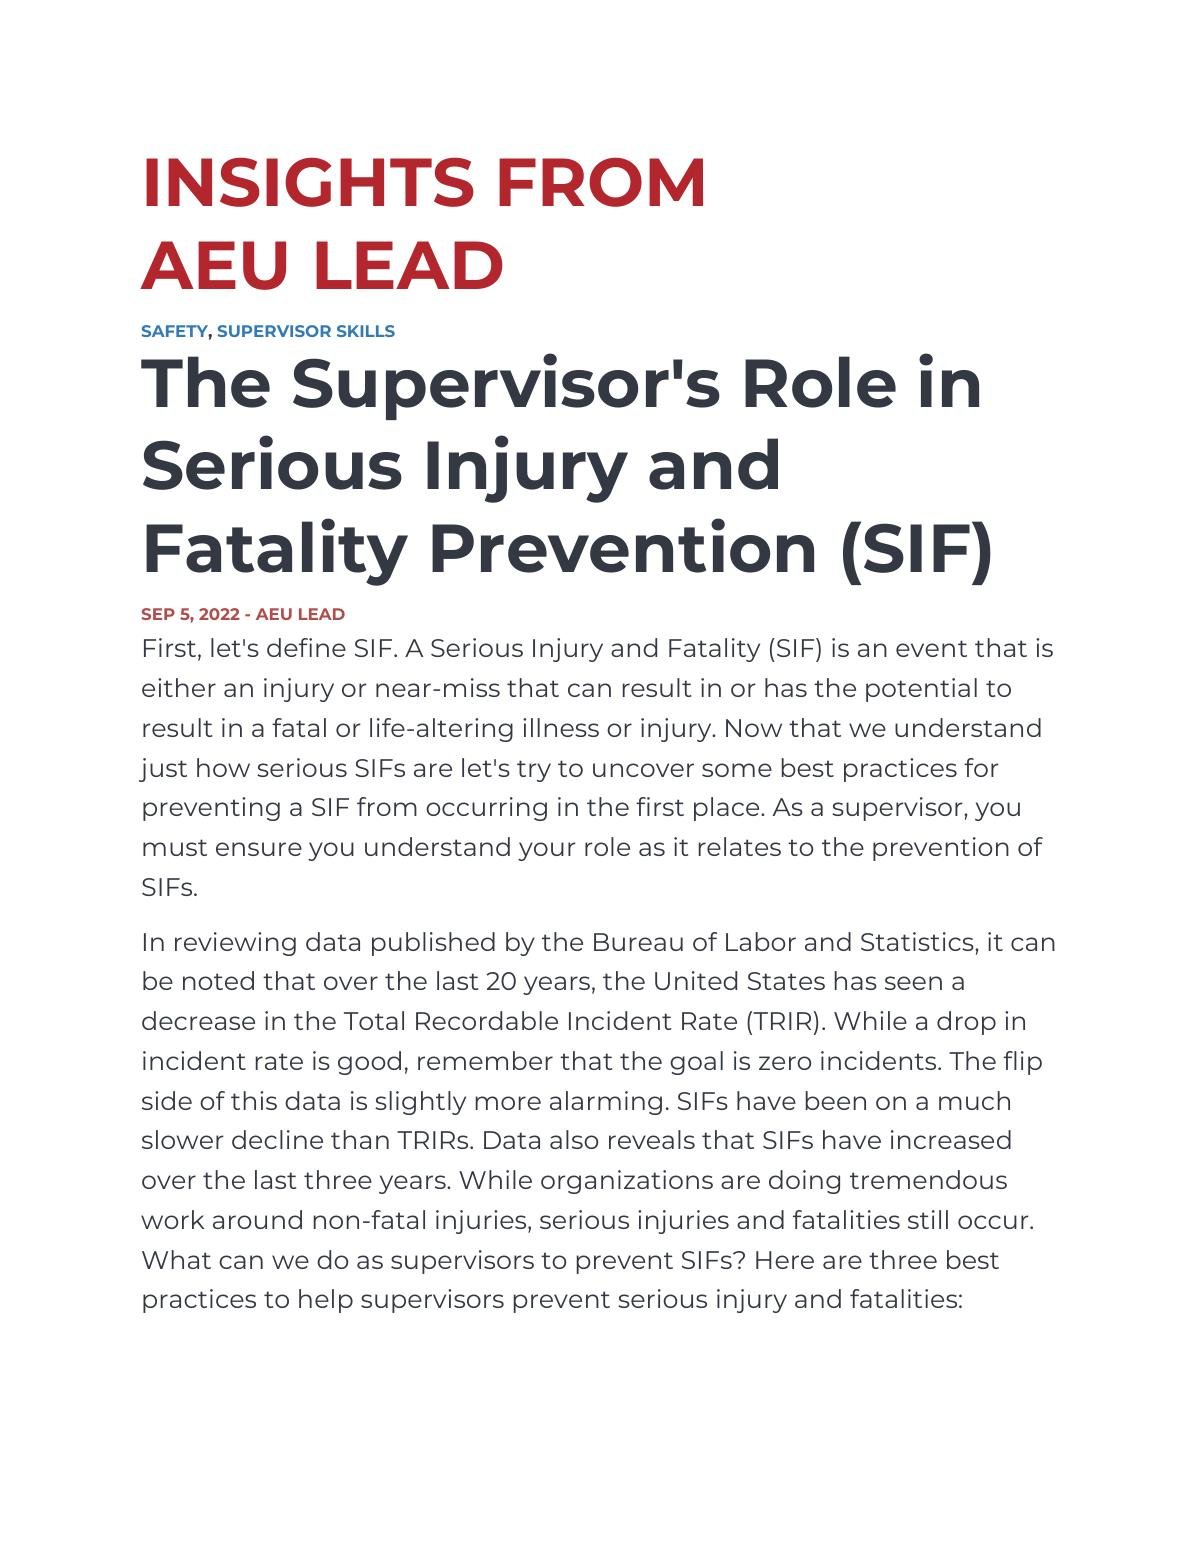 The Supervisor's Role in Serious Injury and Fatality Prevention (SIF)